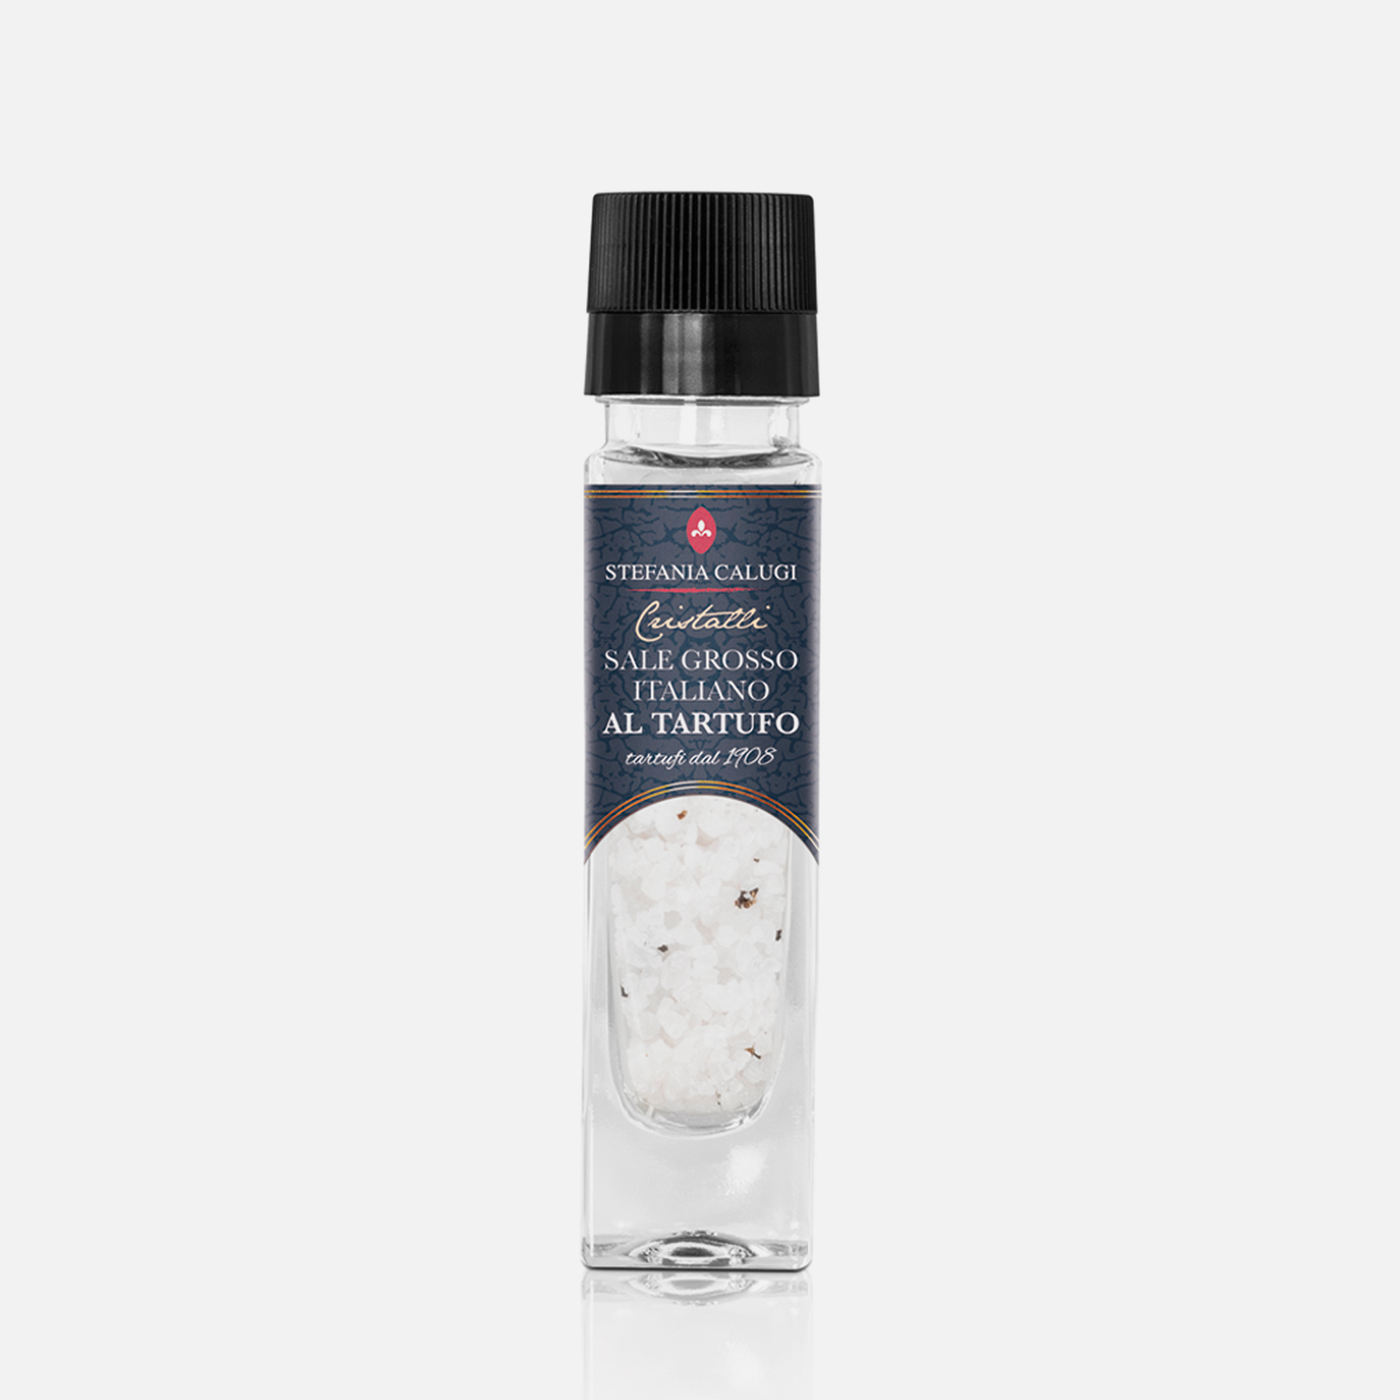 Crystals of Salt with Truffle: Truffle-infused Gourmet Salt Crystals